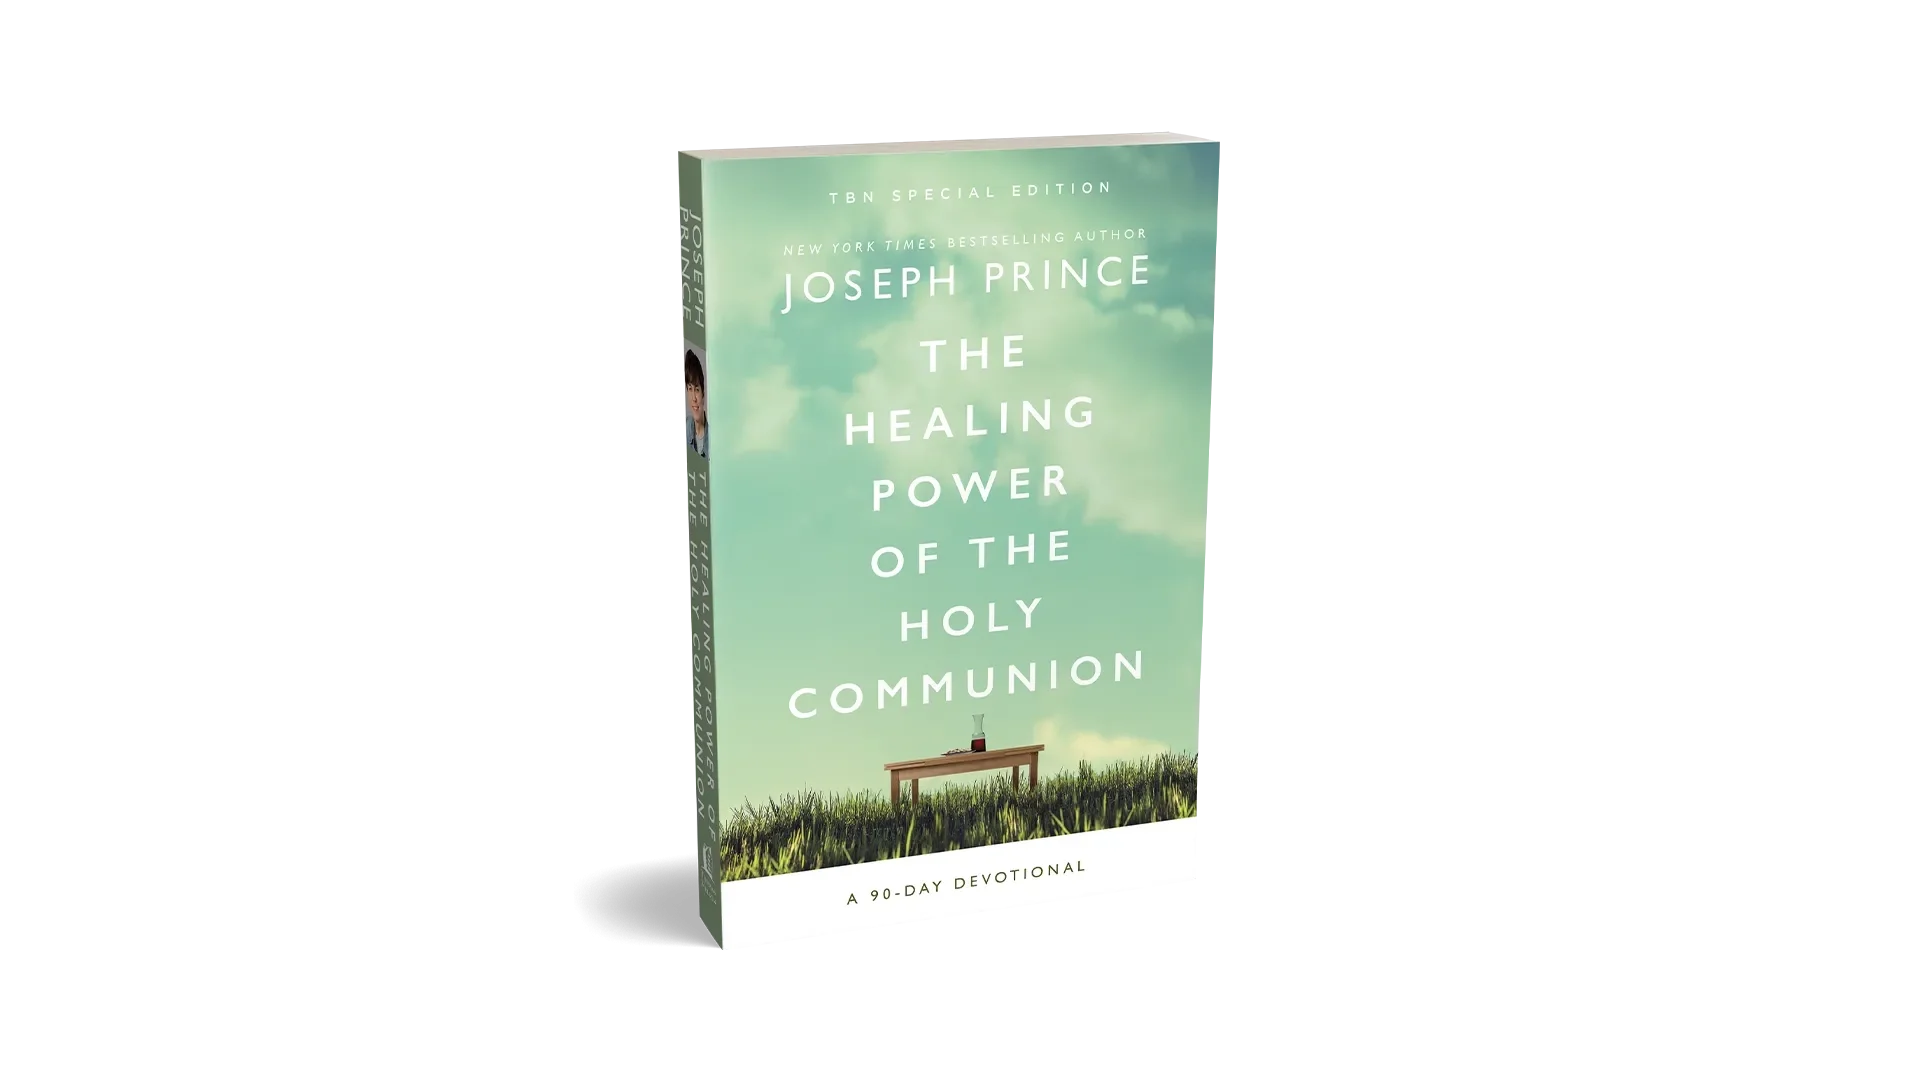 The Healing Power of the Holy Communion by Joseph Prince from TBN